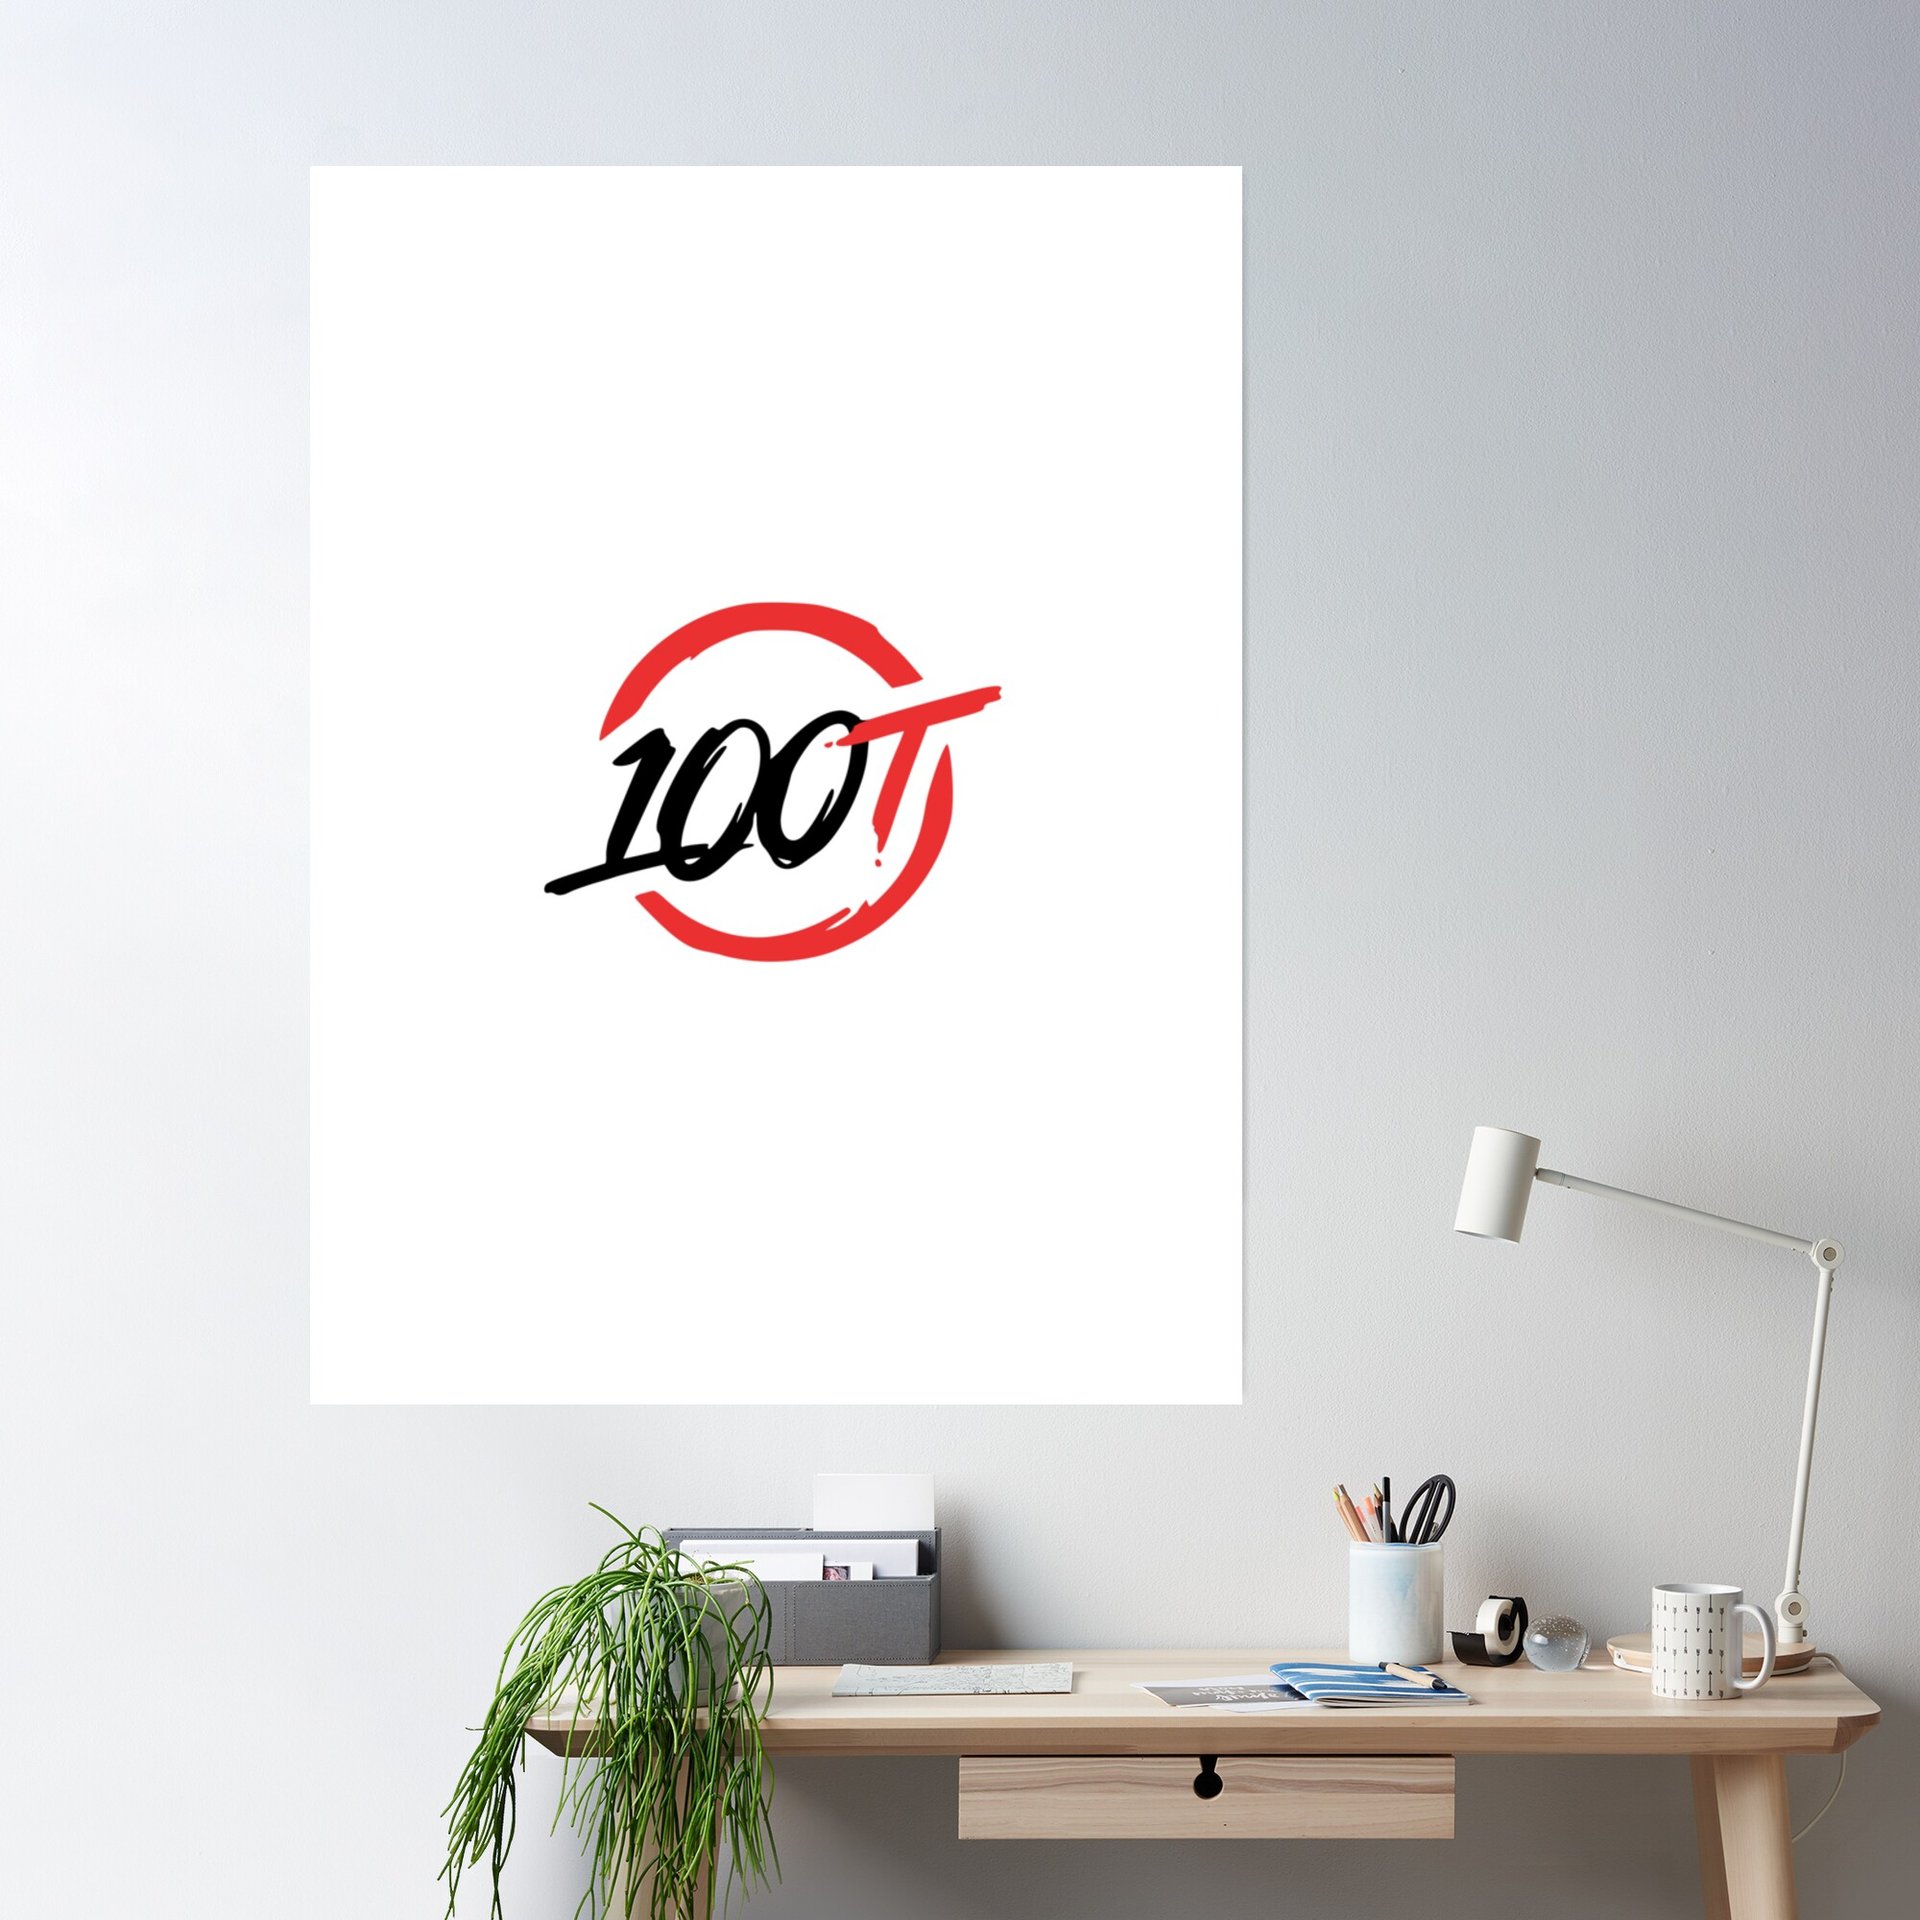 cposterlargesquare product2000x2000 13 - 100 Thieves Shop